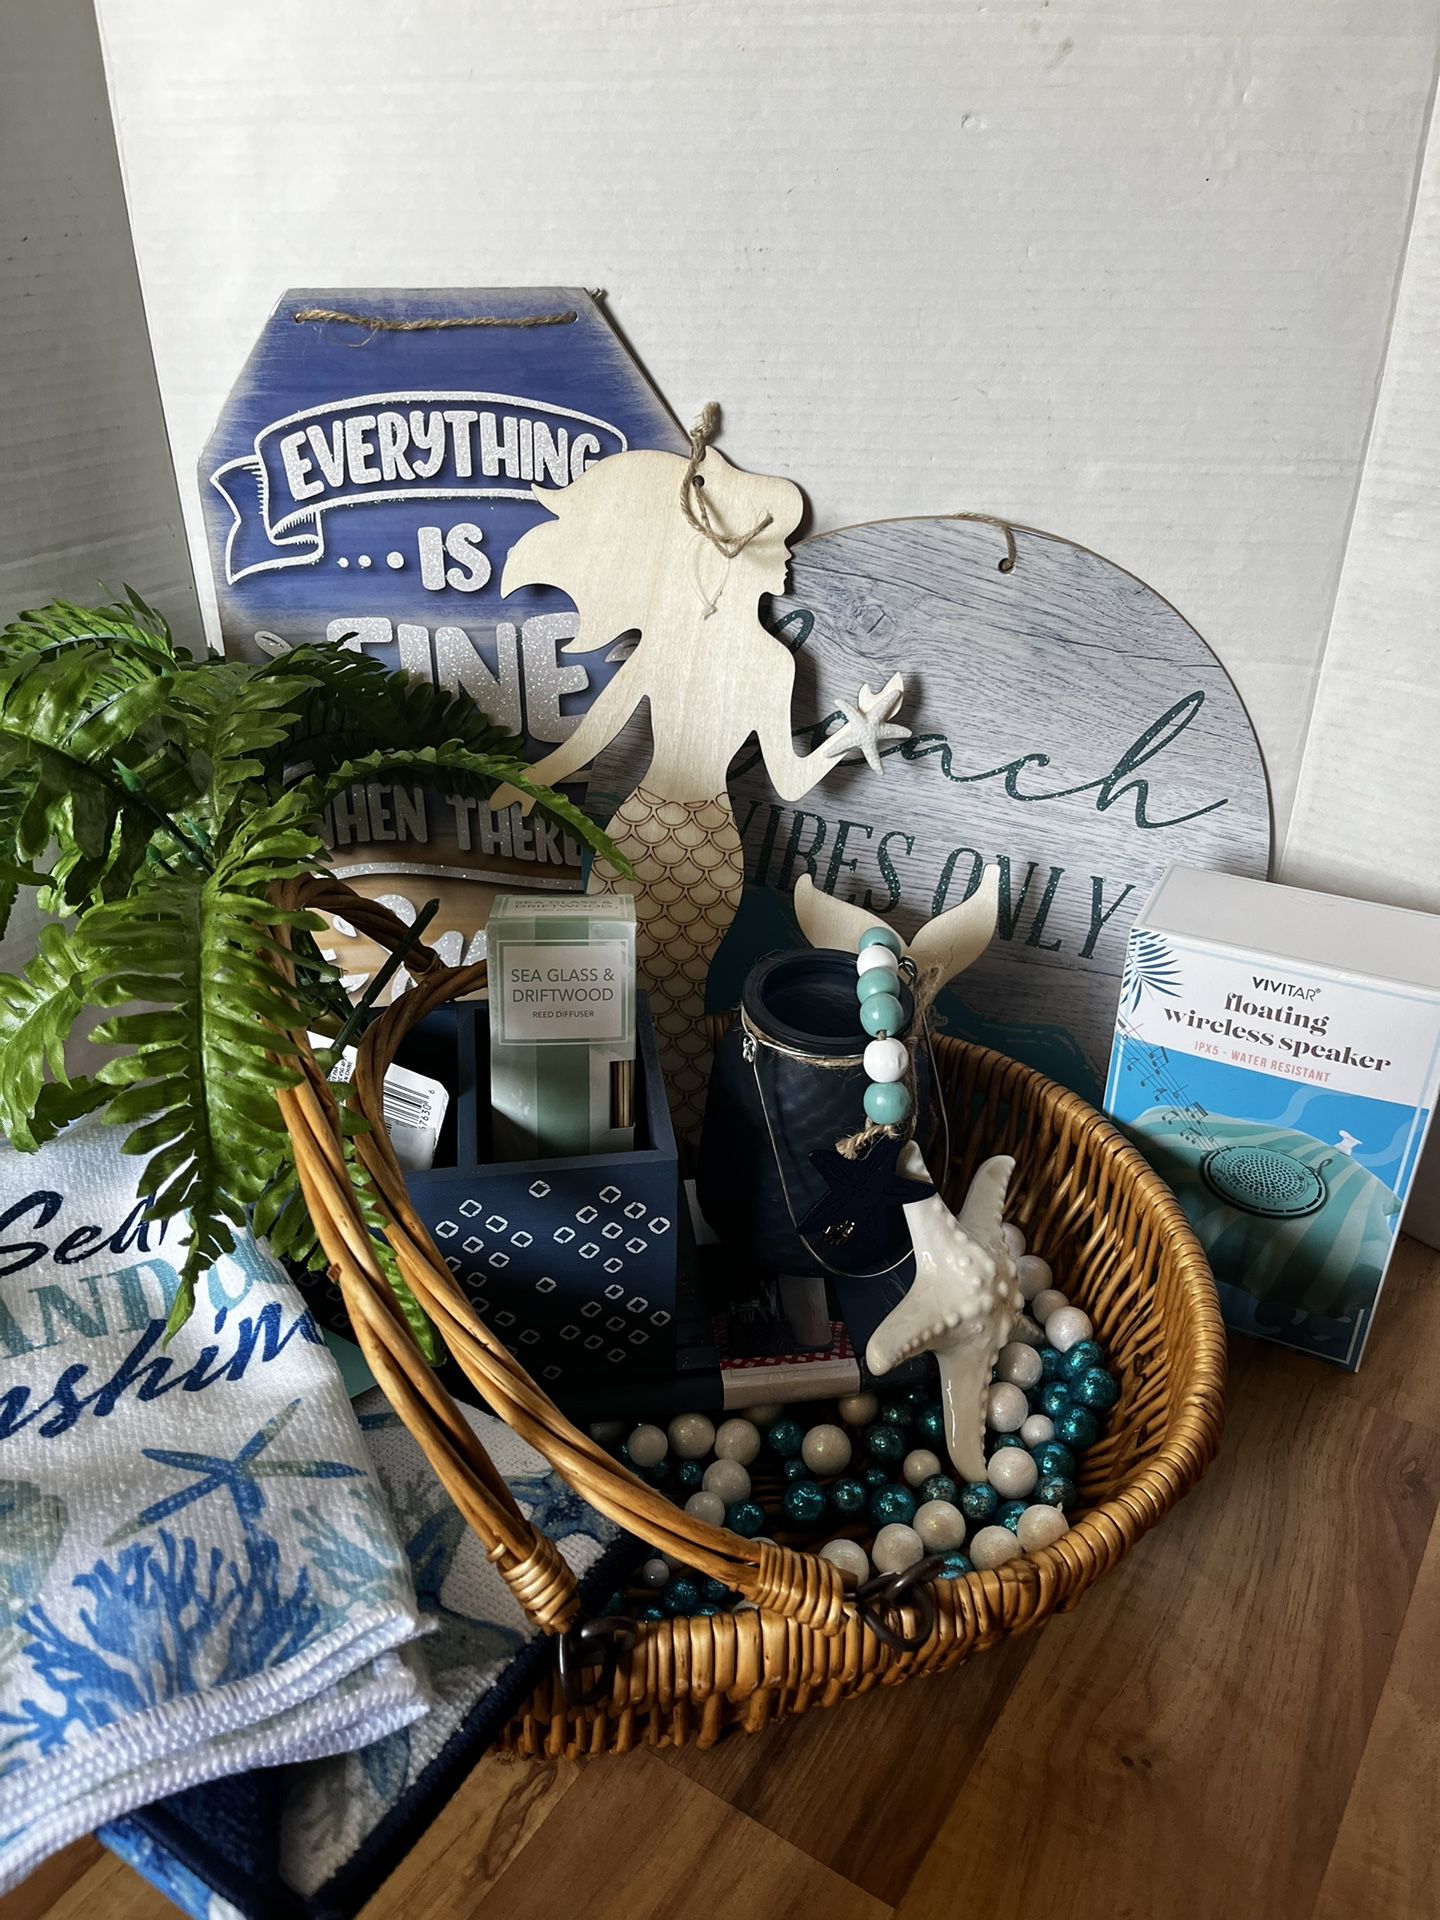 Gift Basket Mermaid Under The Sea Decor Tiered Tray Items for Sale